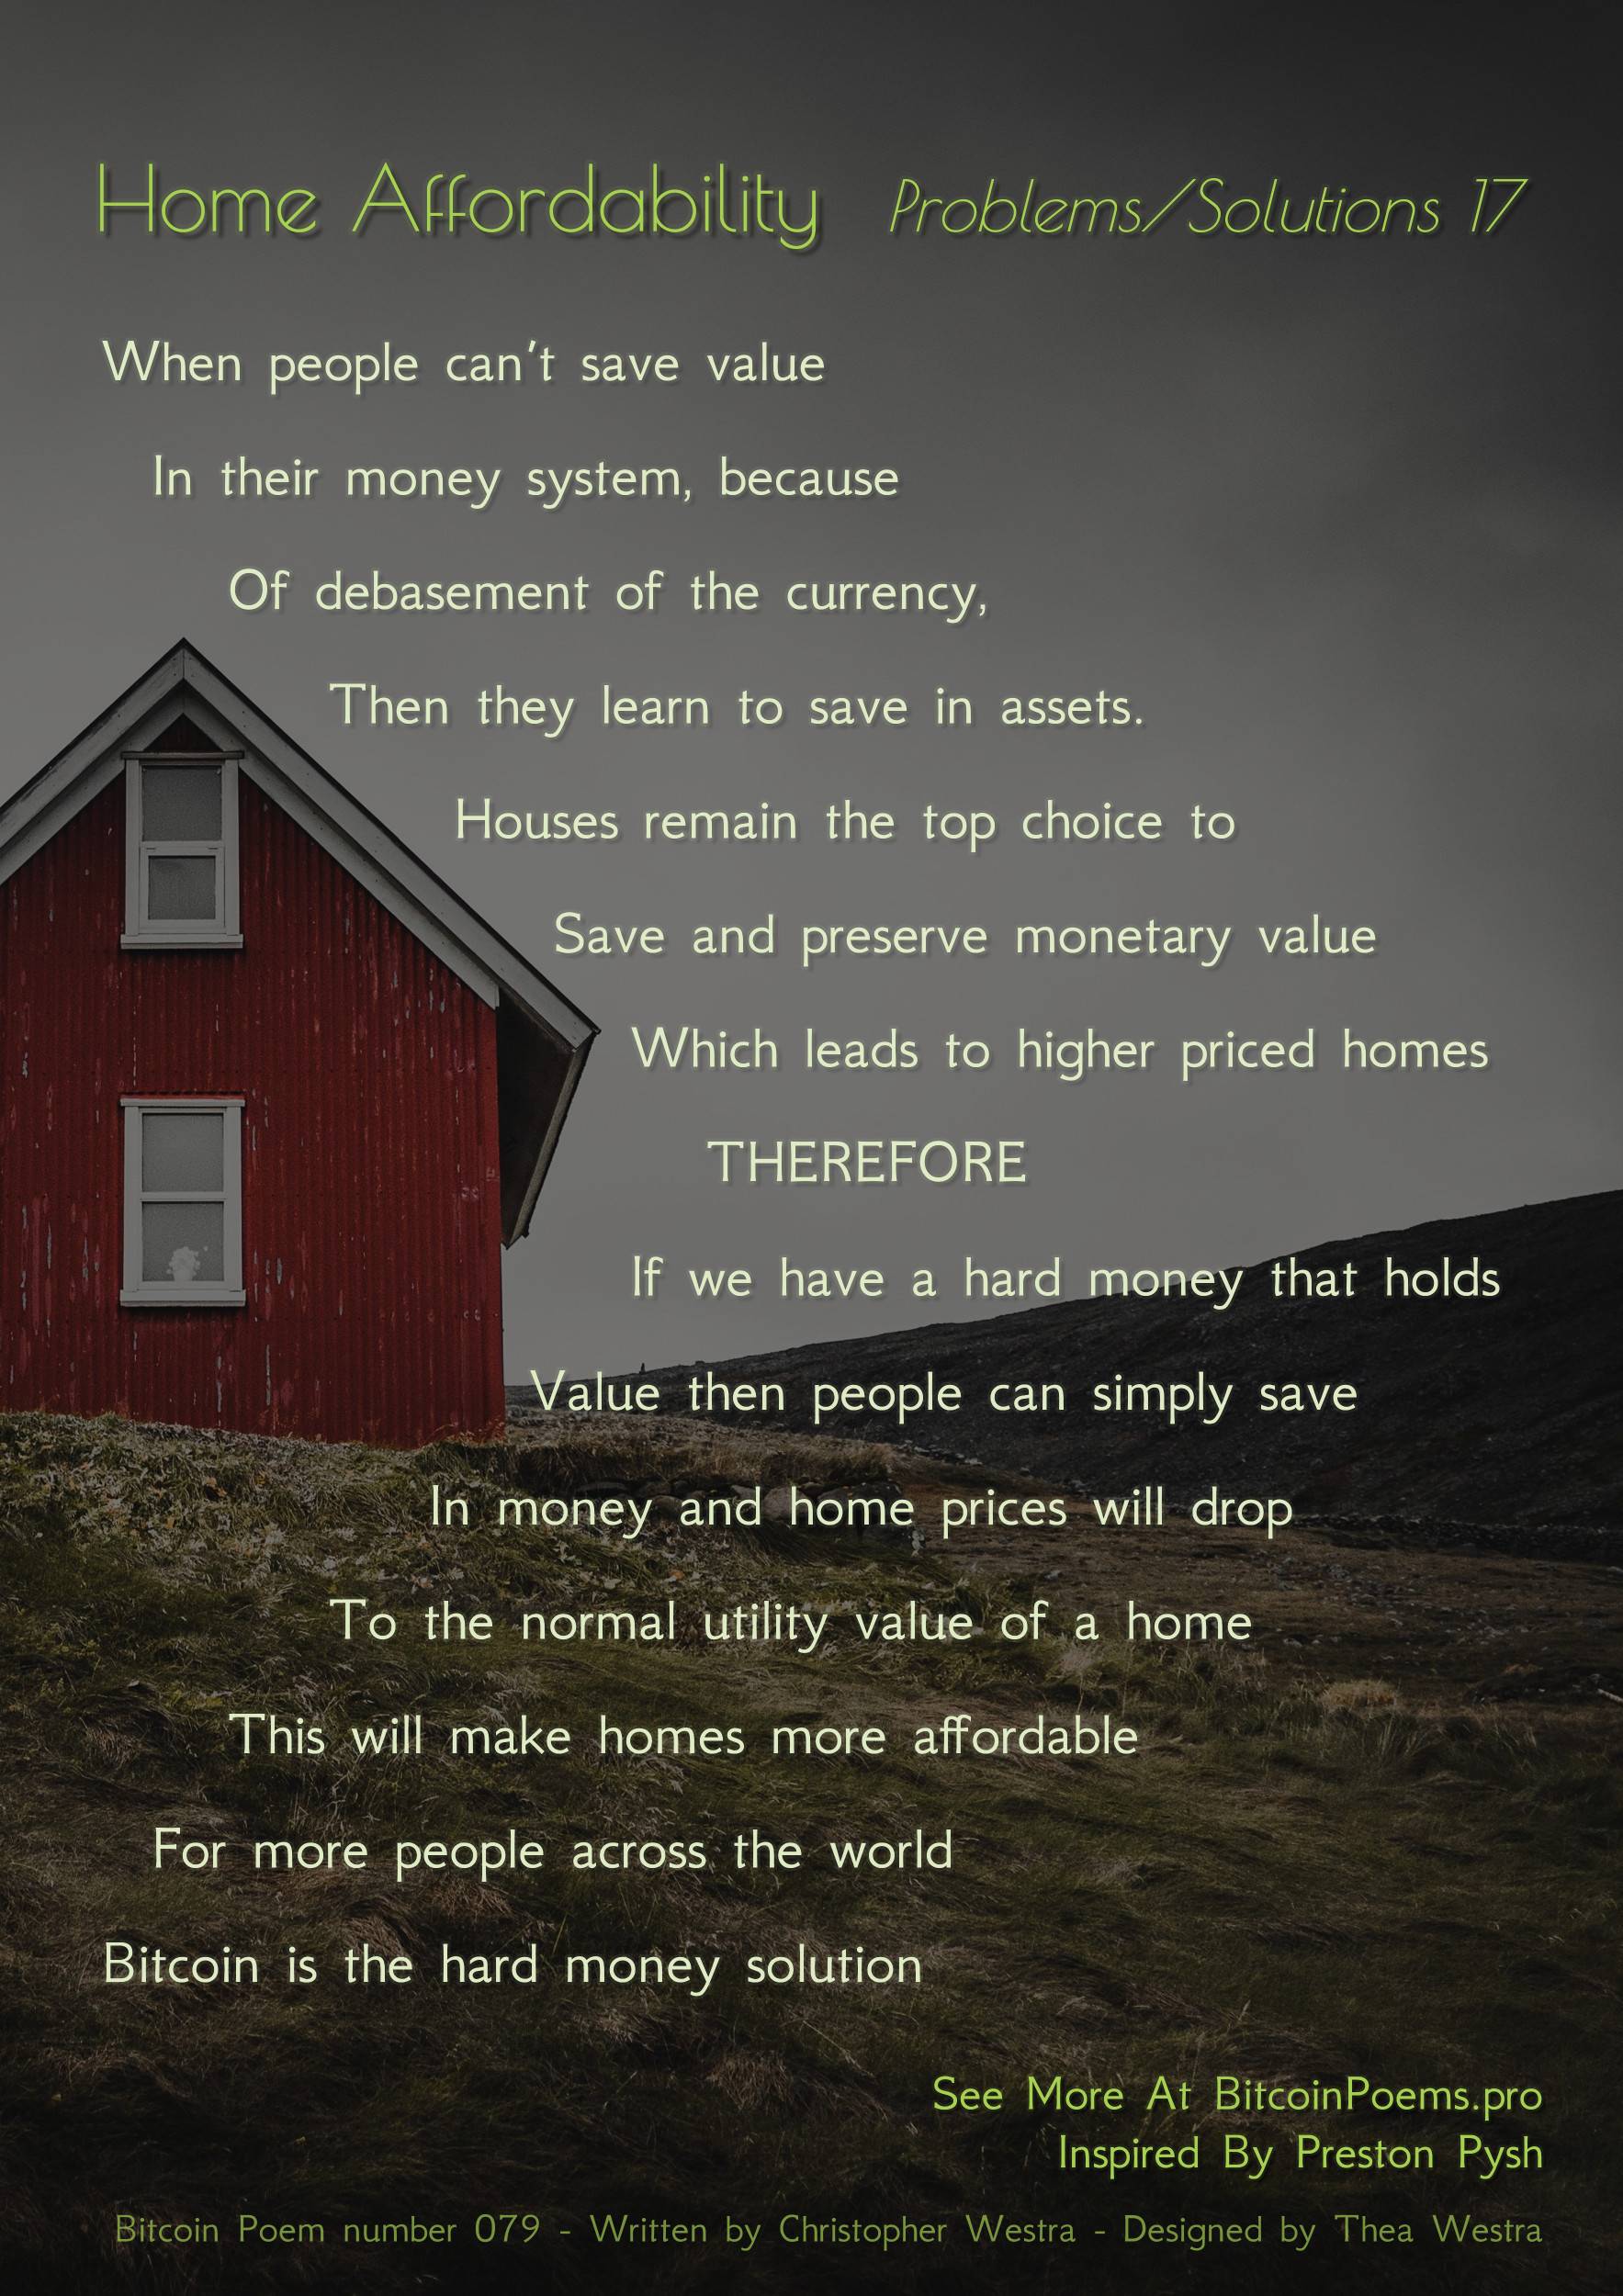 Home Affordability - Bitcoin Poem 079 by Christopher Westra